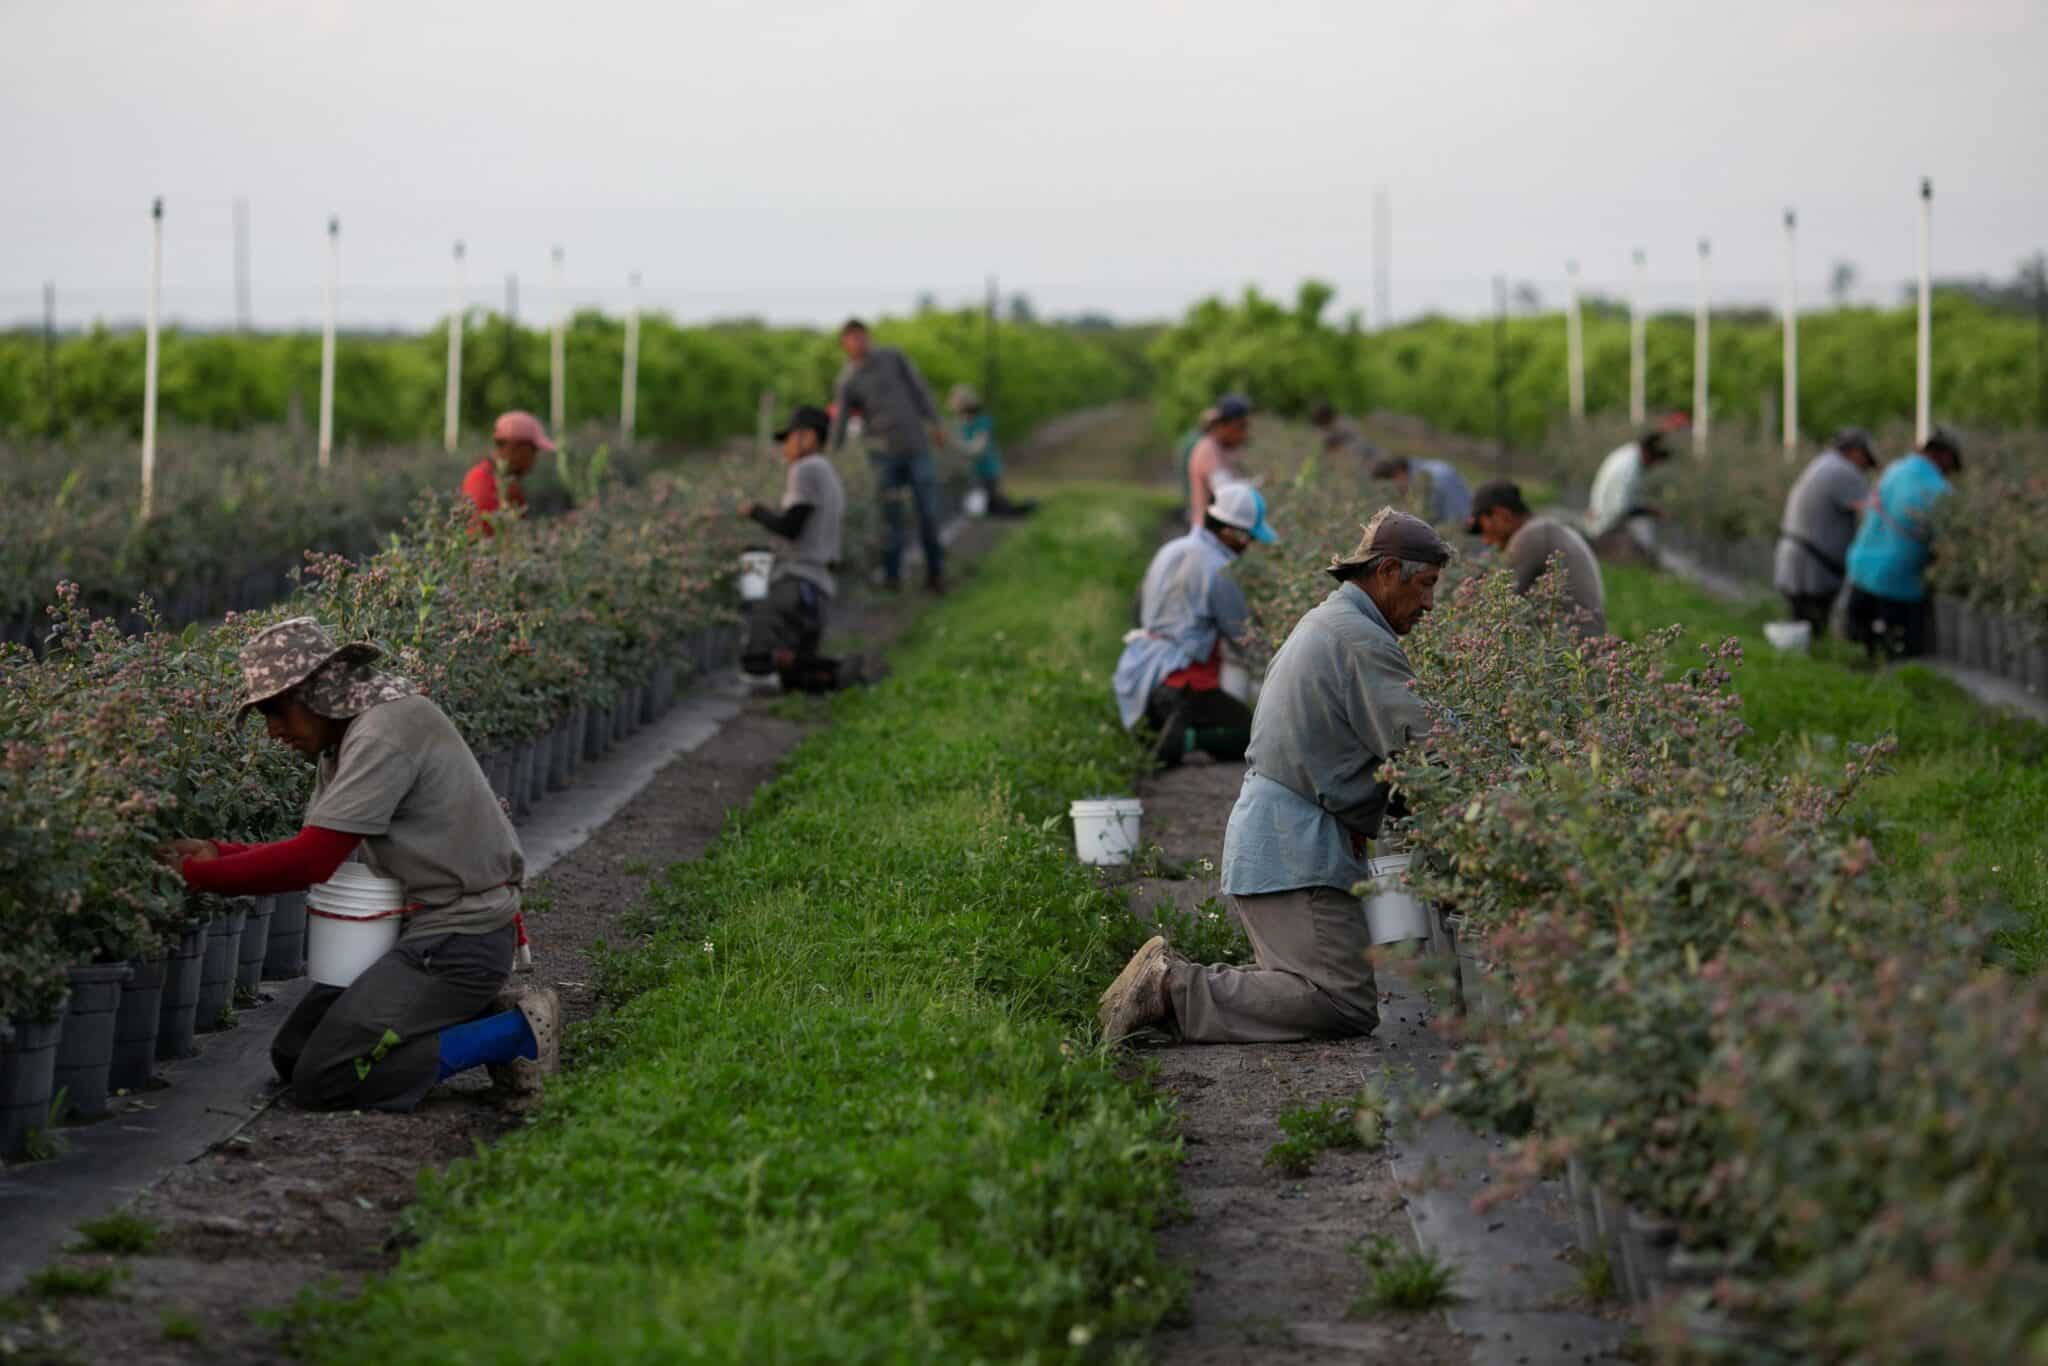 Mexican migrant workers pick blueberries during a harvest at a farm in Lake Wales, Florida, U.S., March 31, 2020. (OSV News photo/Marco Bello, Reuters)